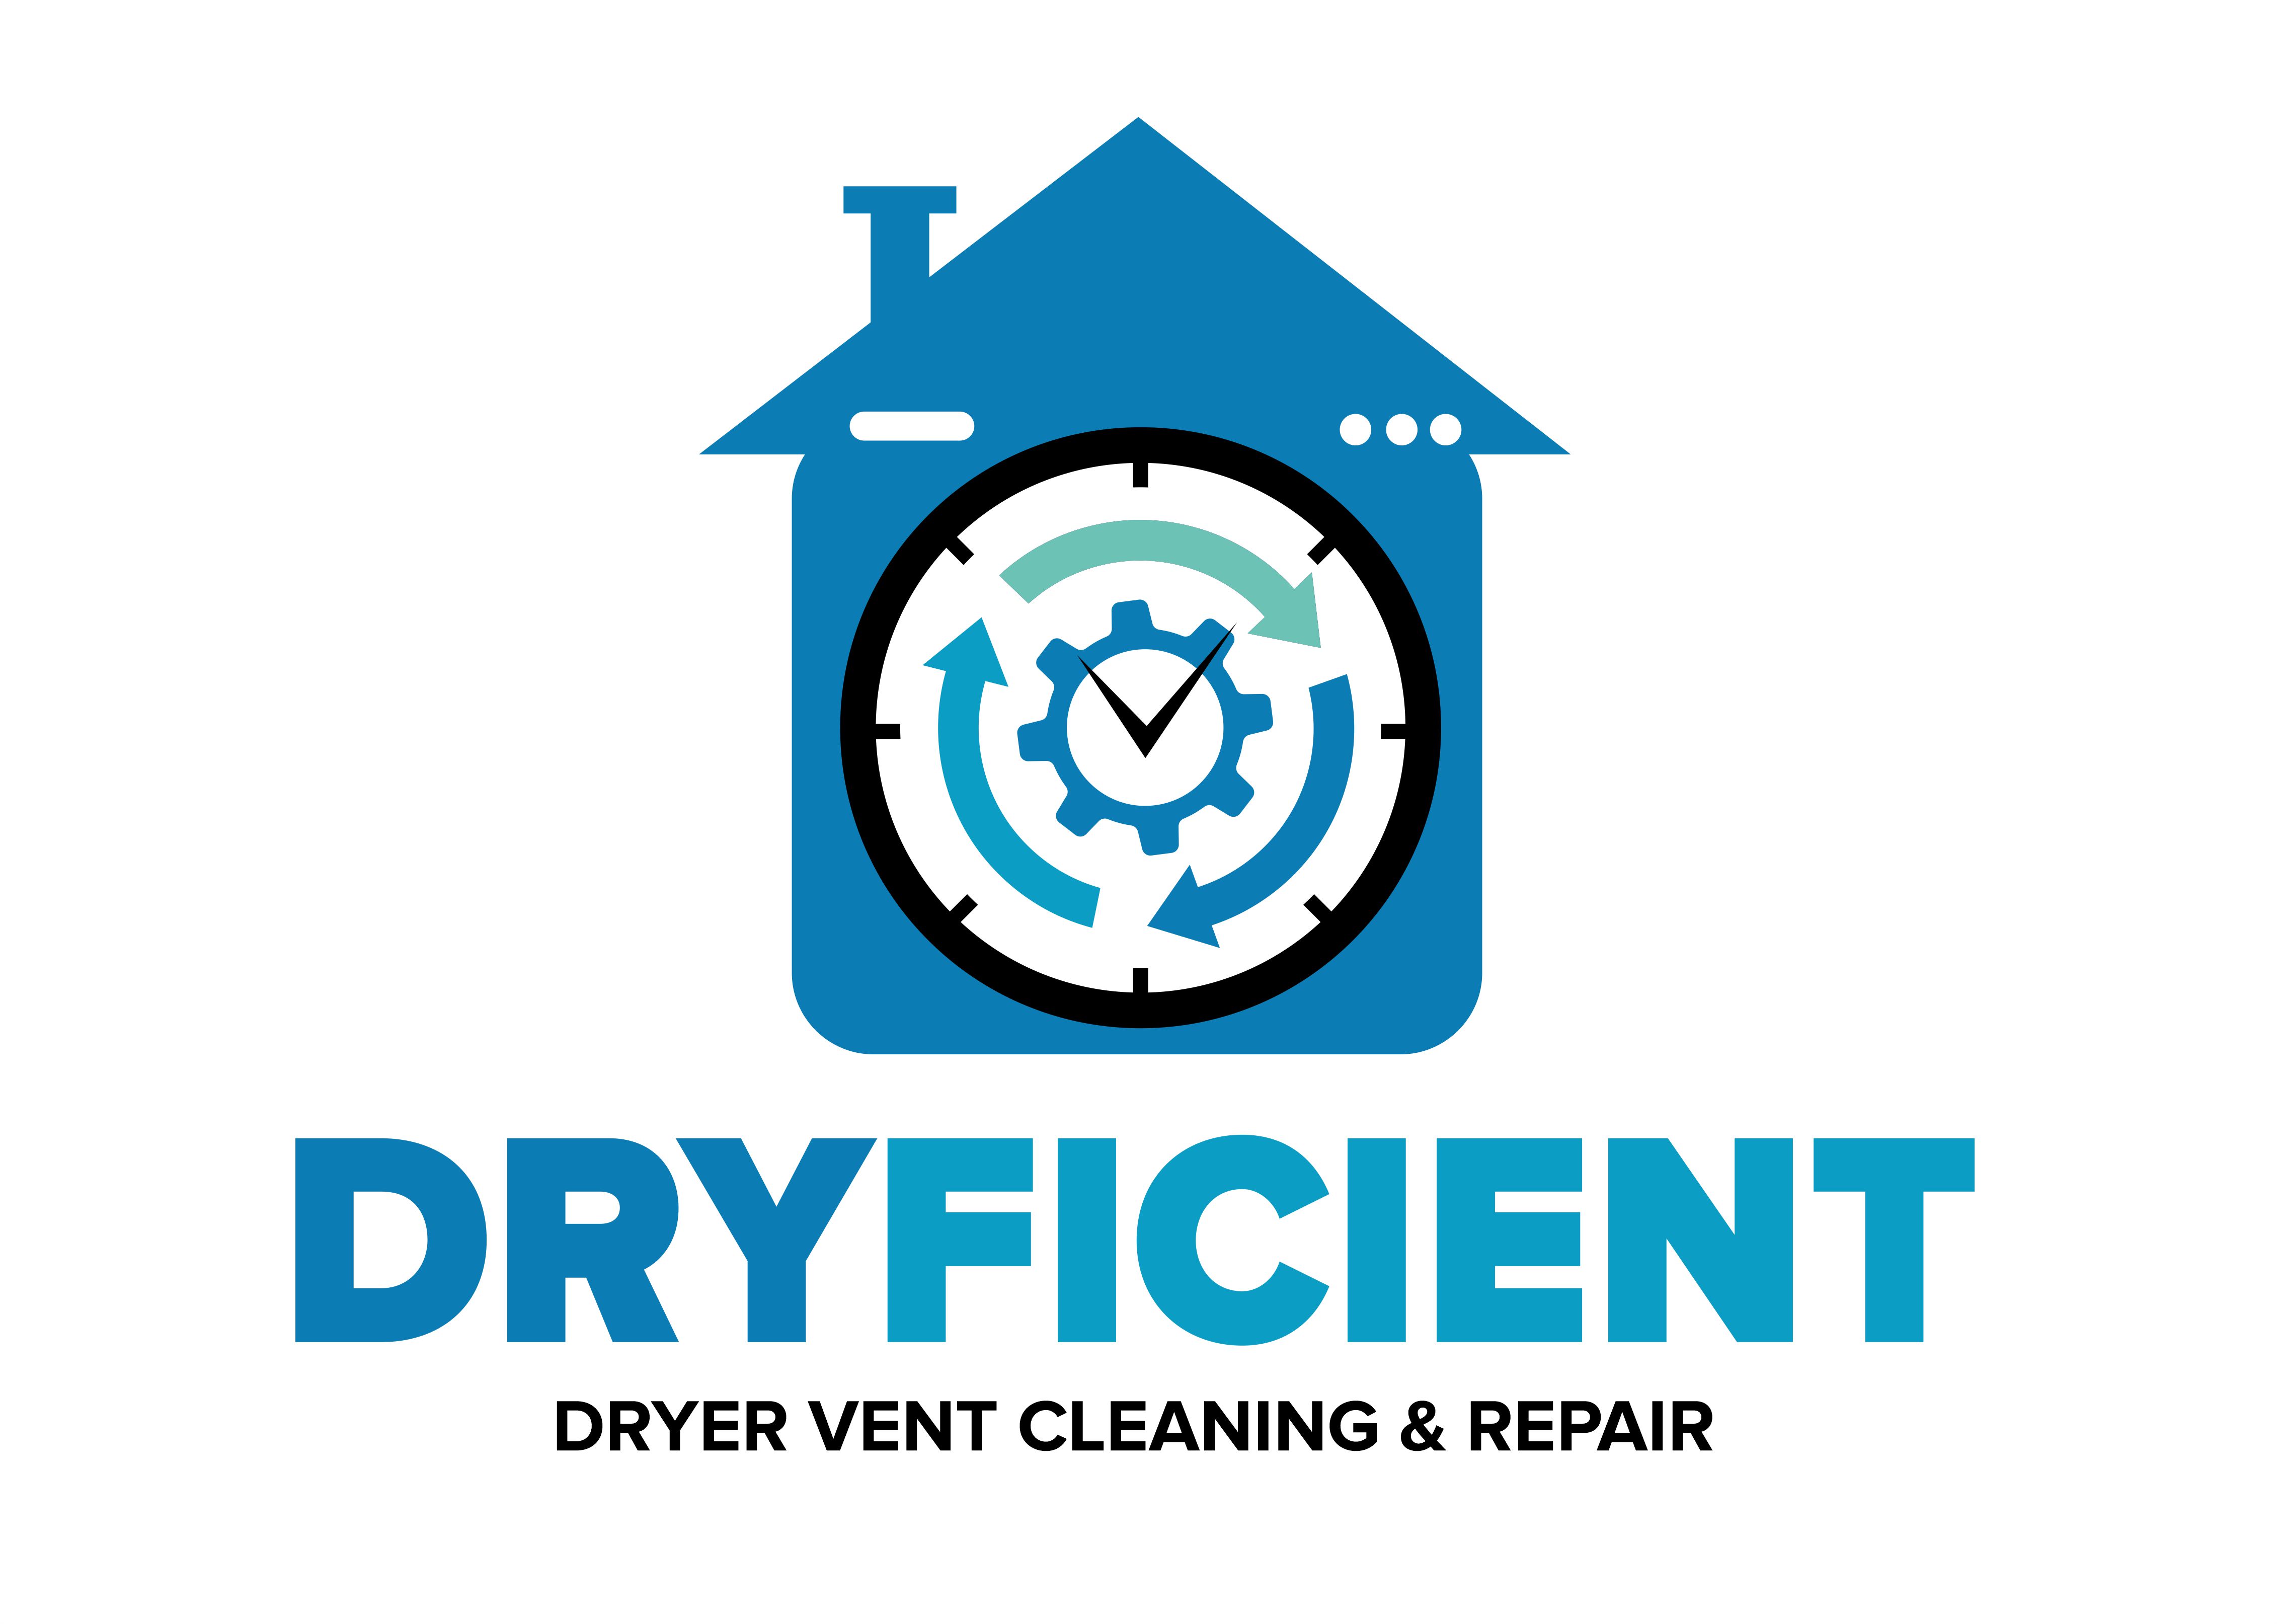 Dryficient Dryer Vent Cleaning and Repair Logo